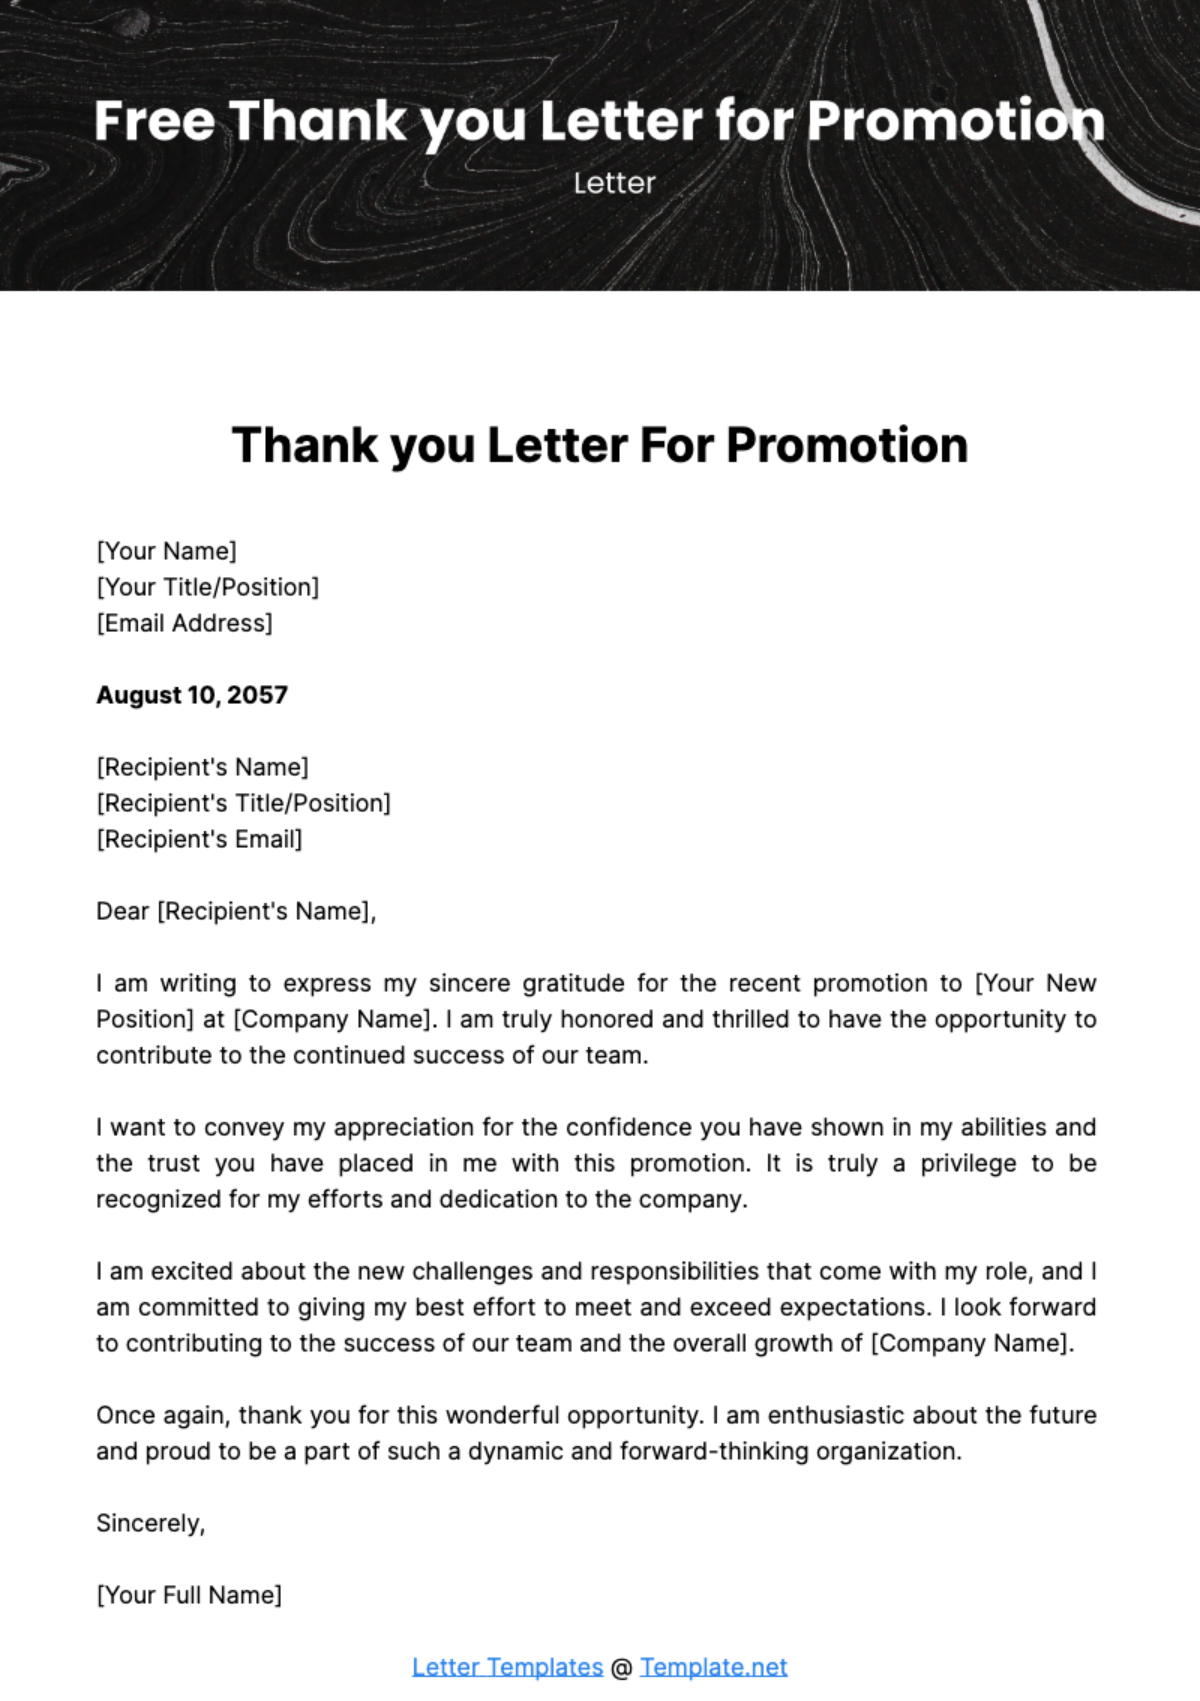 Thank you Letter for Promotion Template